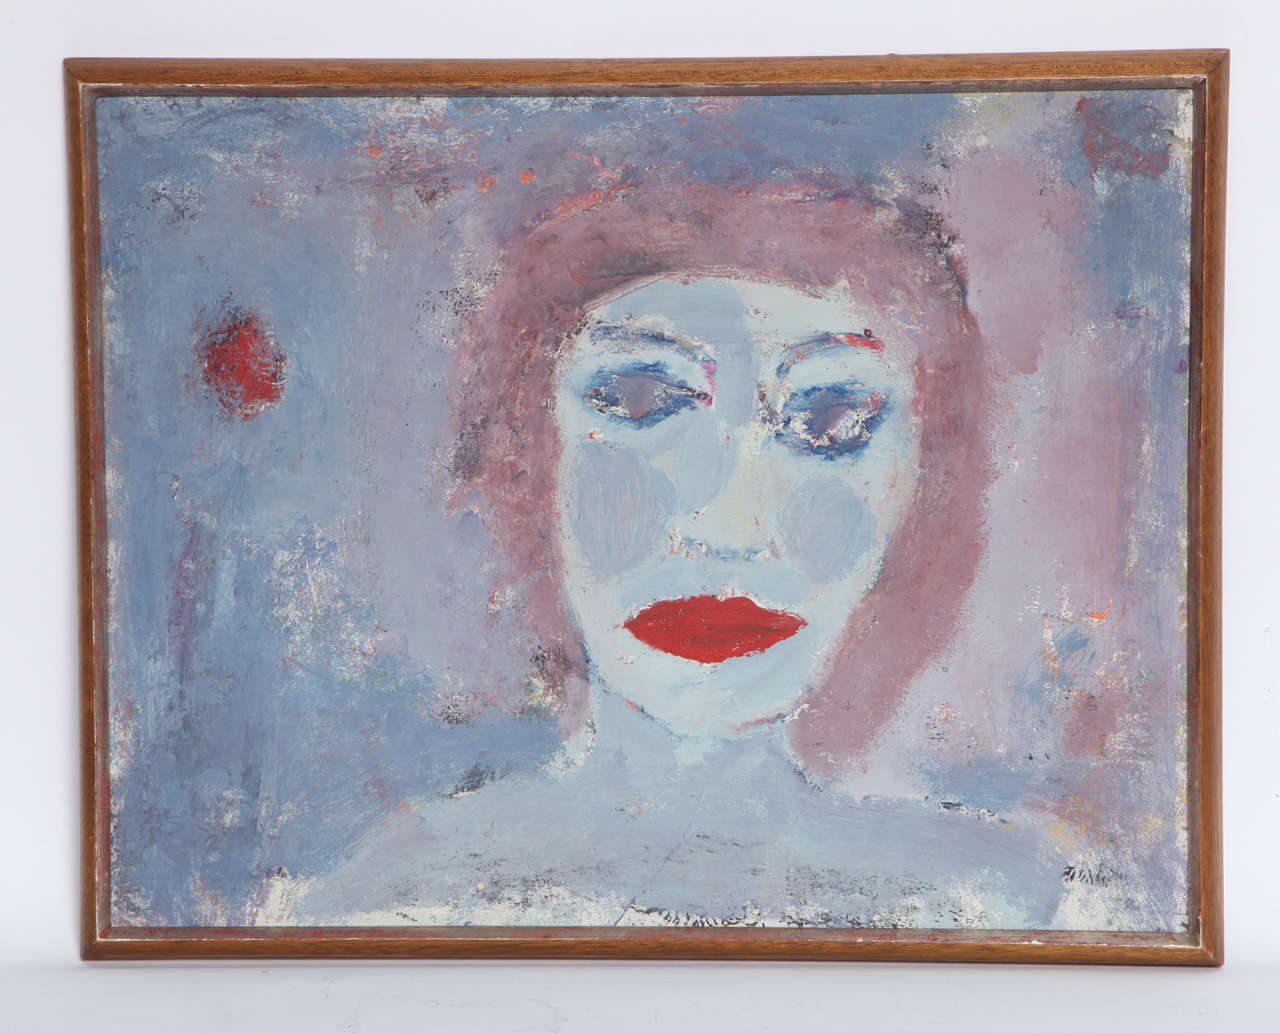 A wonderful painting by outsider artist of woman with Red Lips oil stick and paint on board